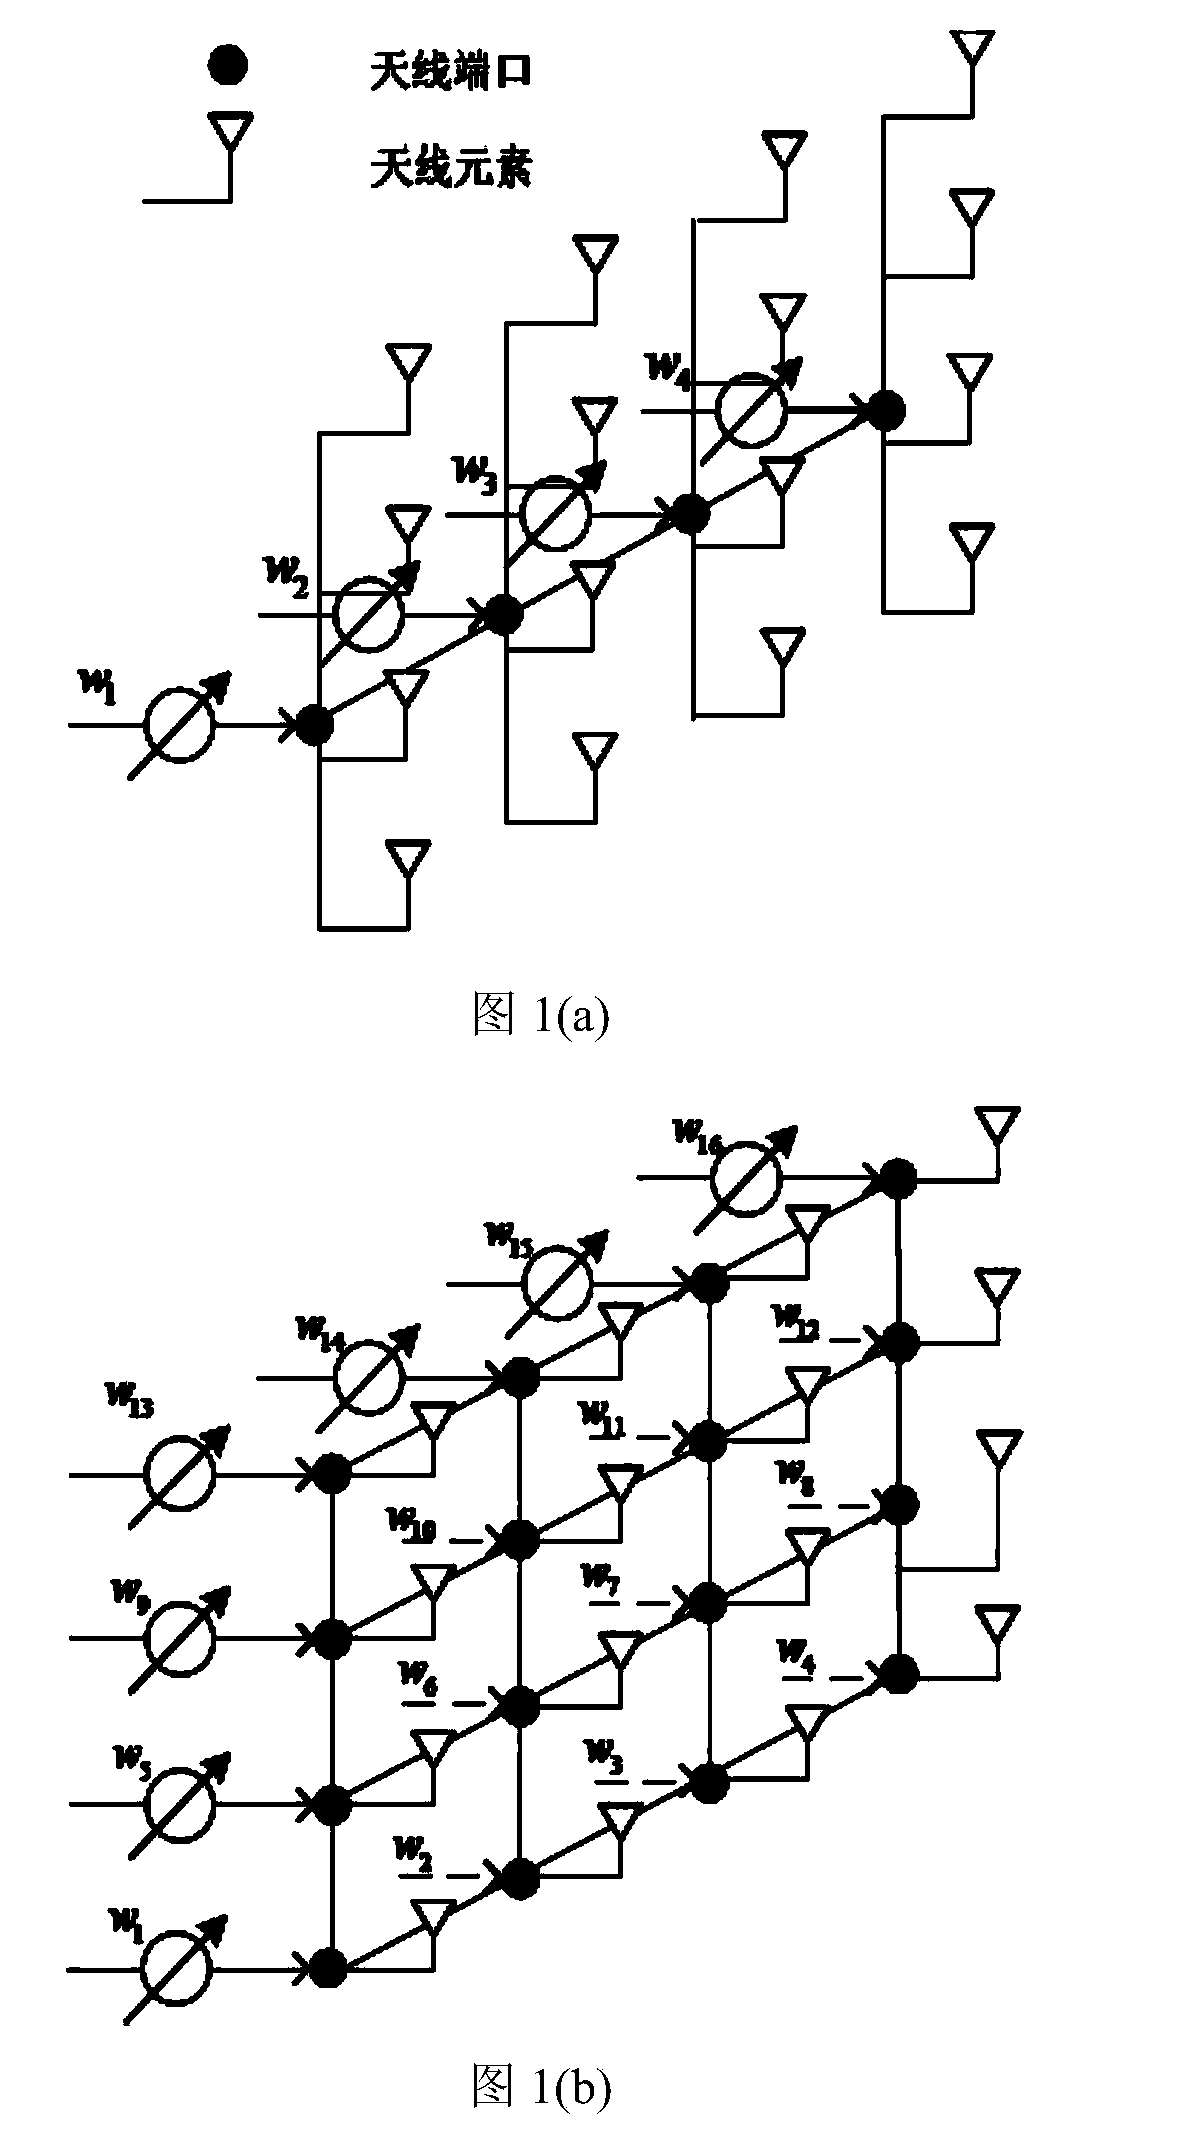 Method for multi-user dispatching transmission based on 3D-MIMO codebook design